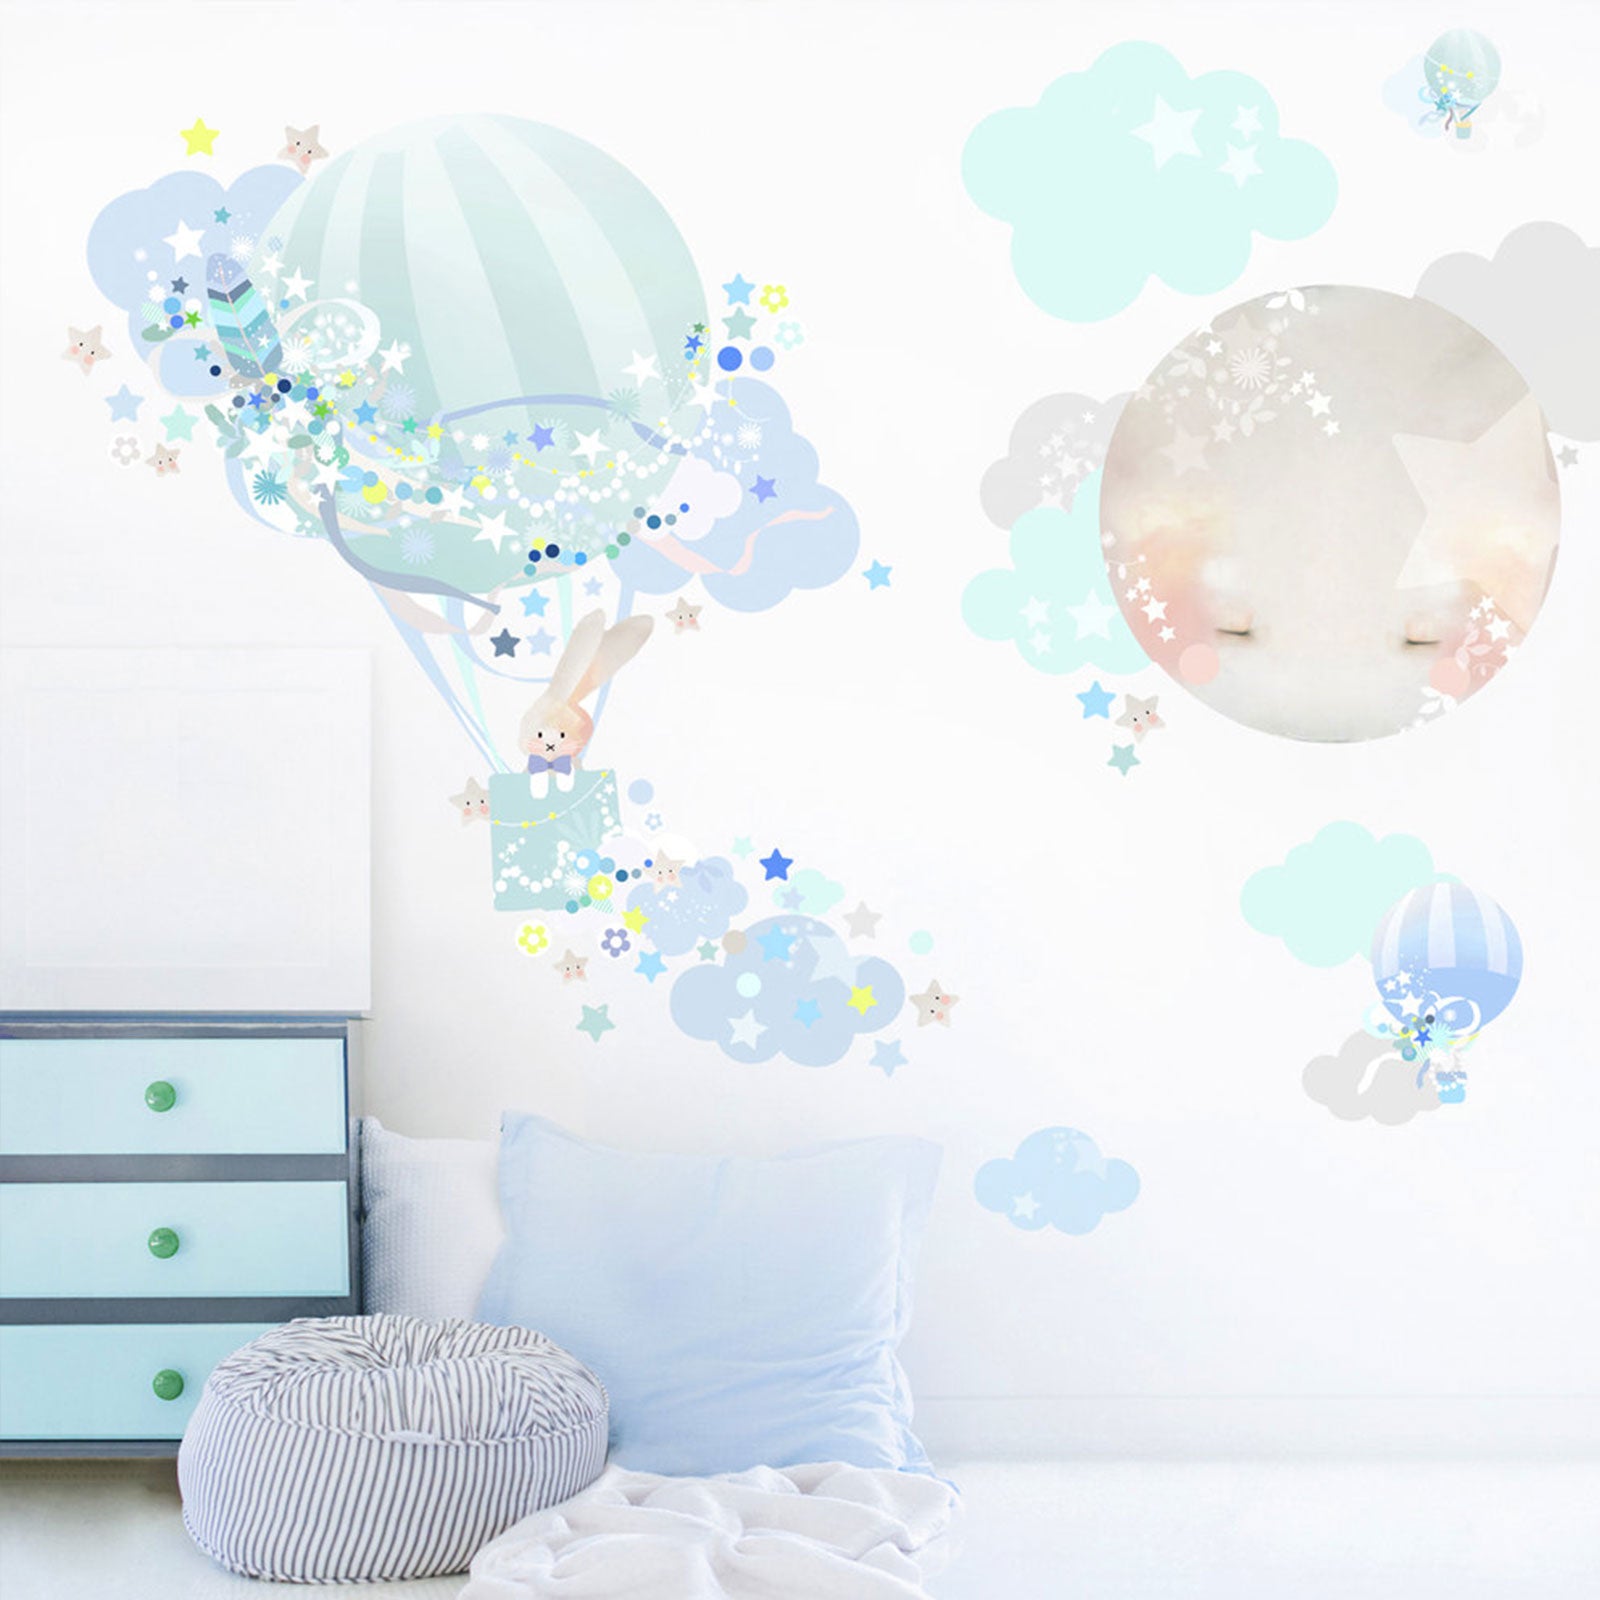 Balloons Sticker pack - Stickers Cloud